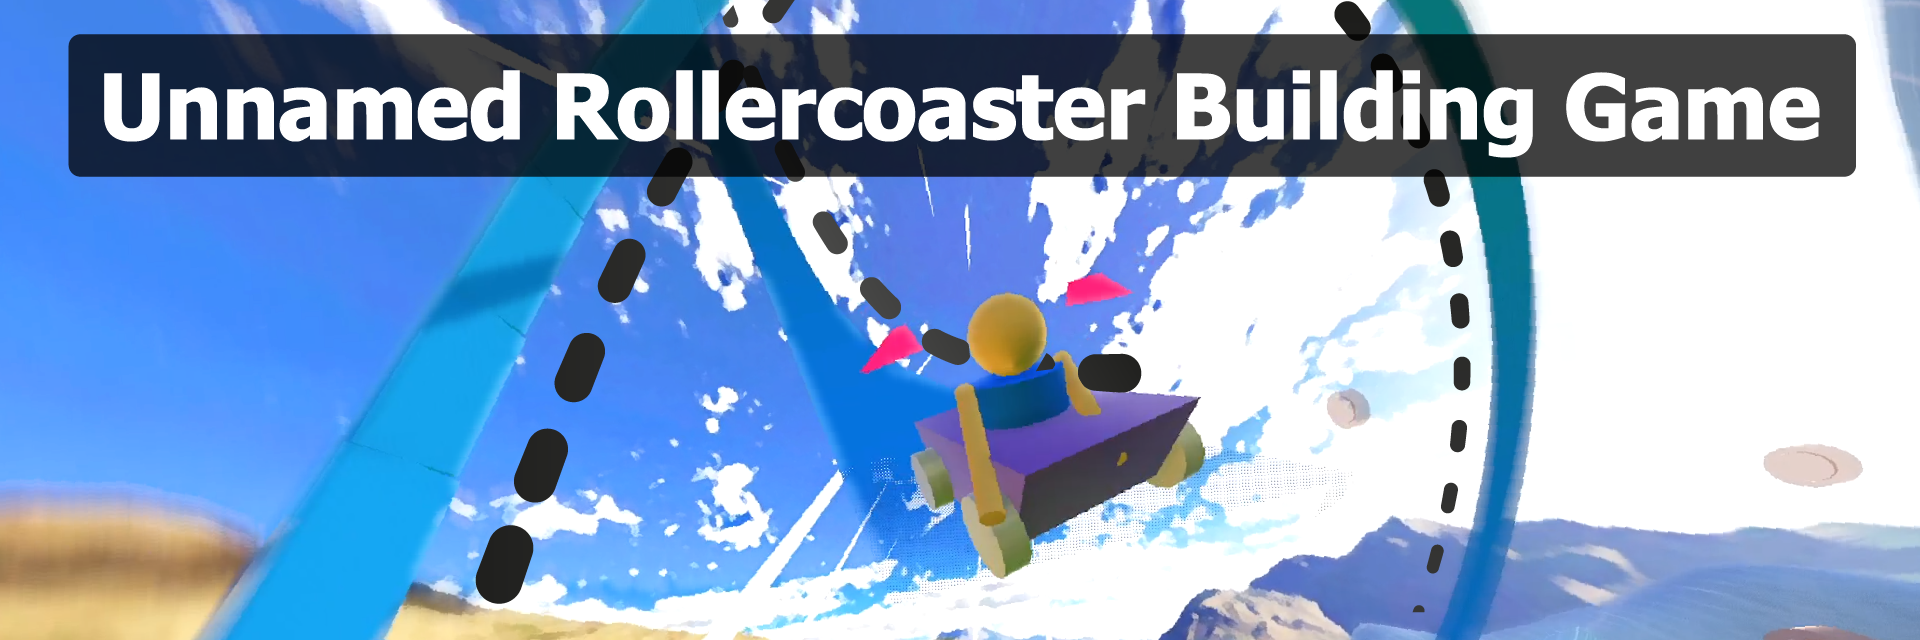 Unnamed Rollercoaster Building Game